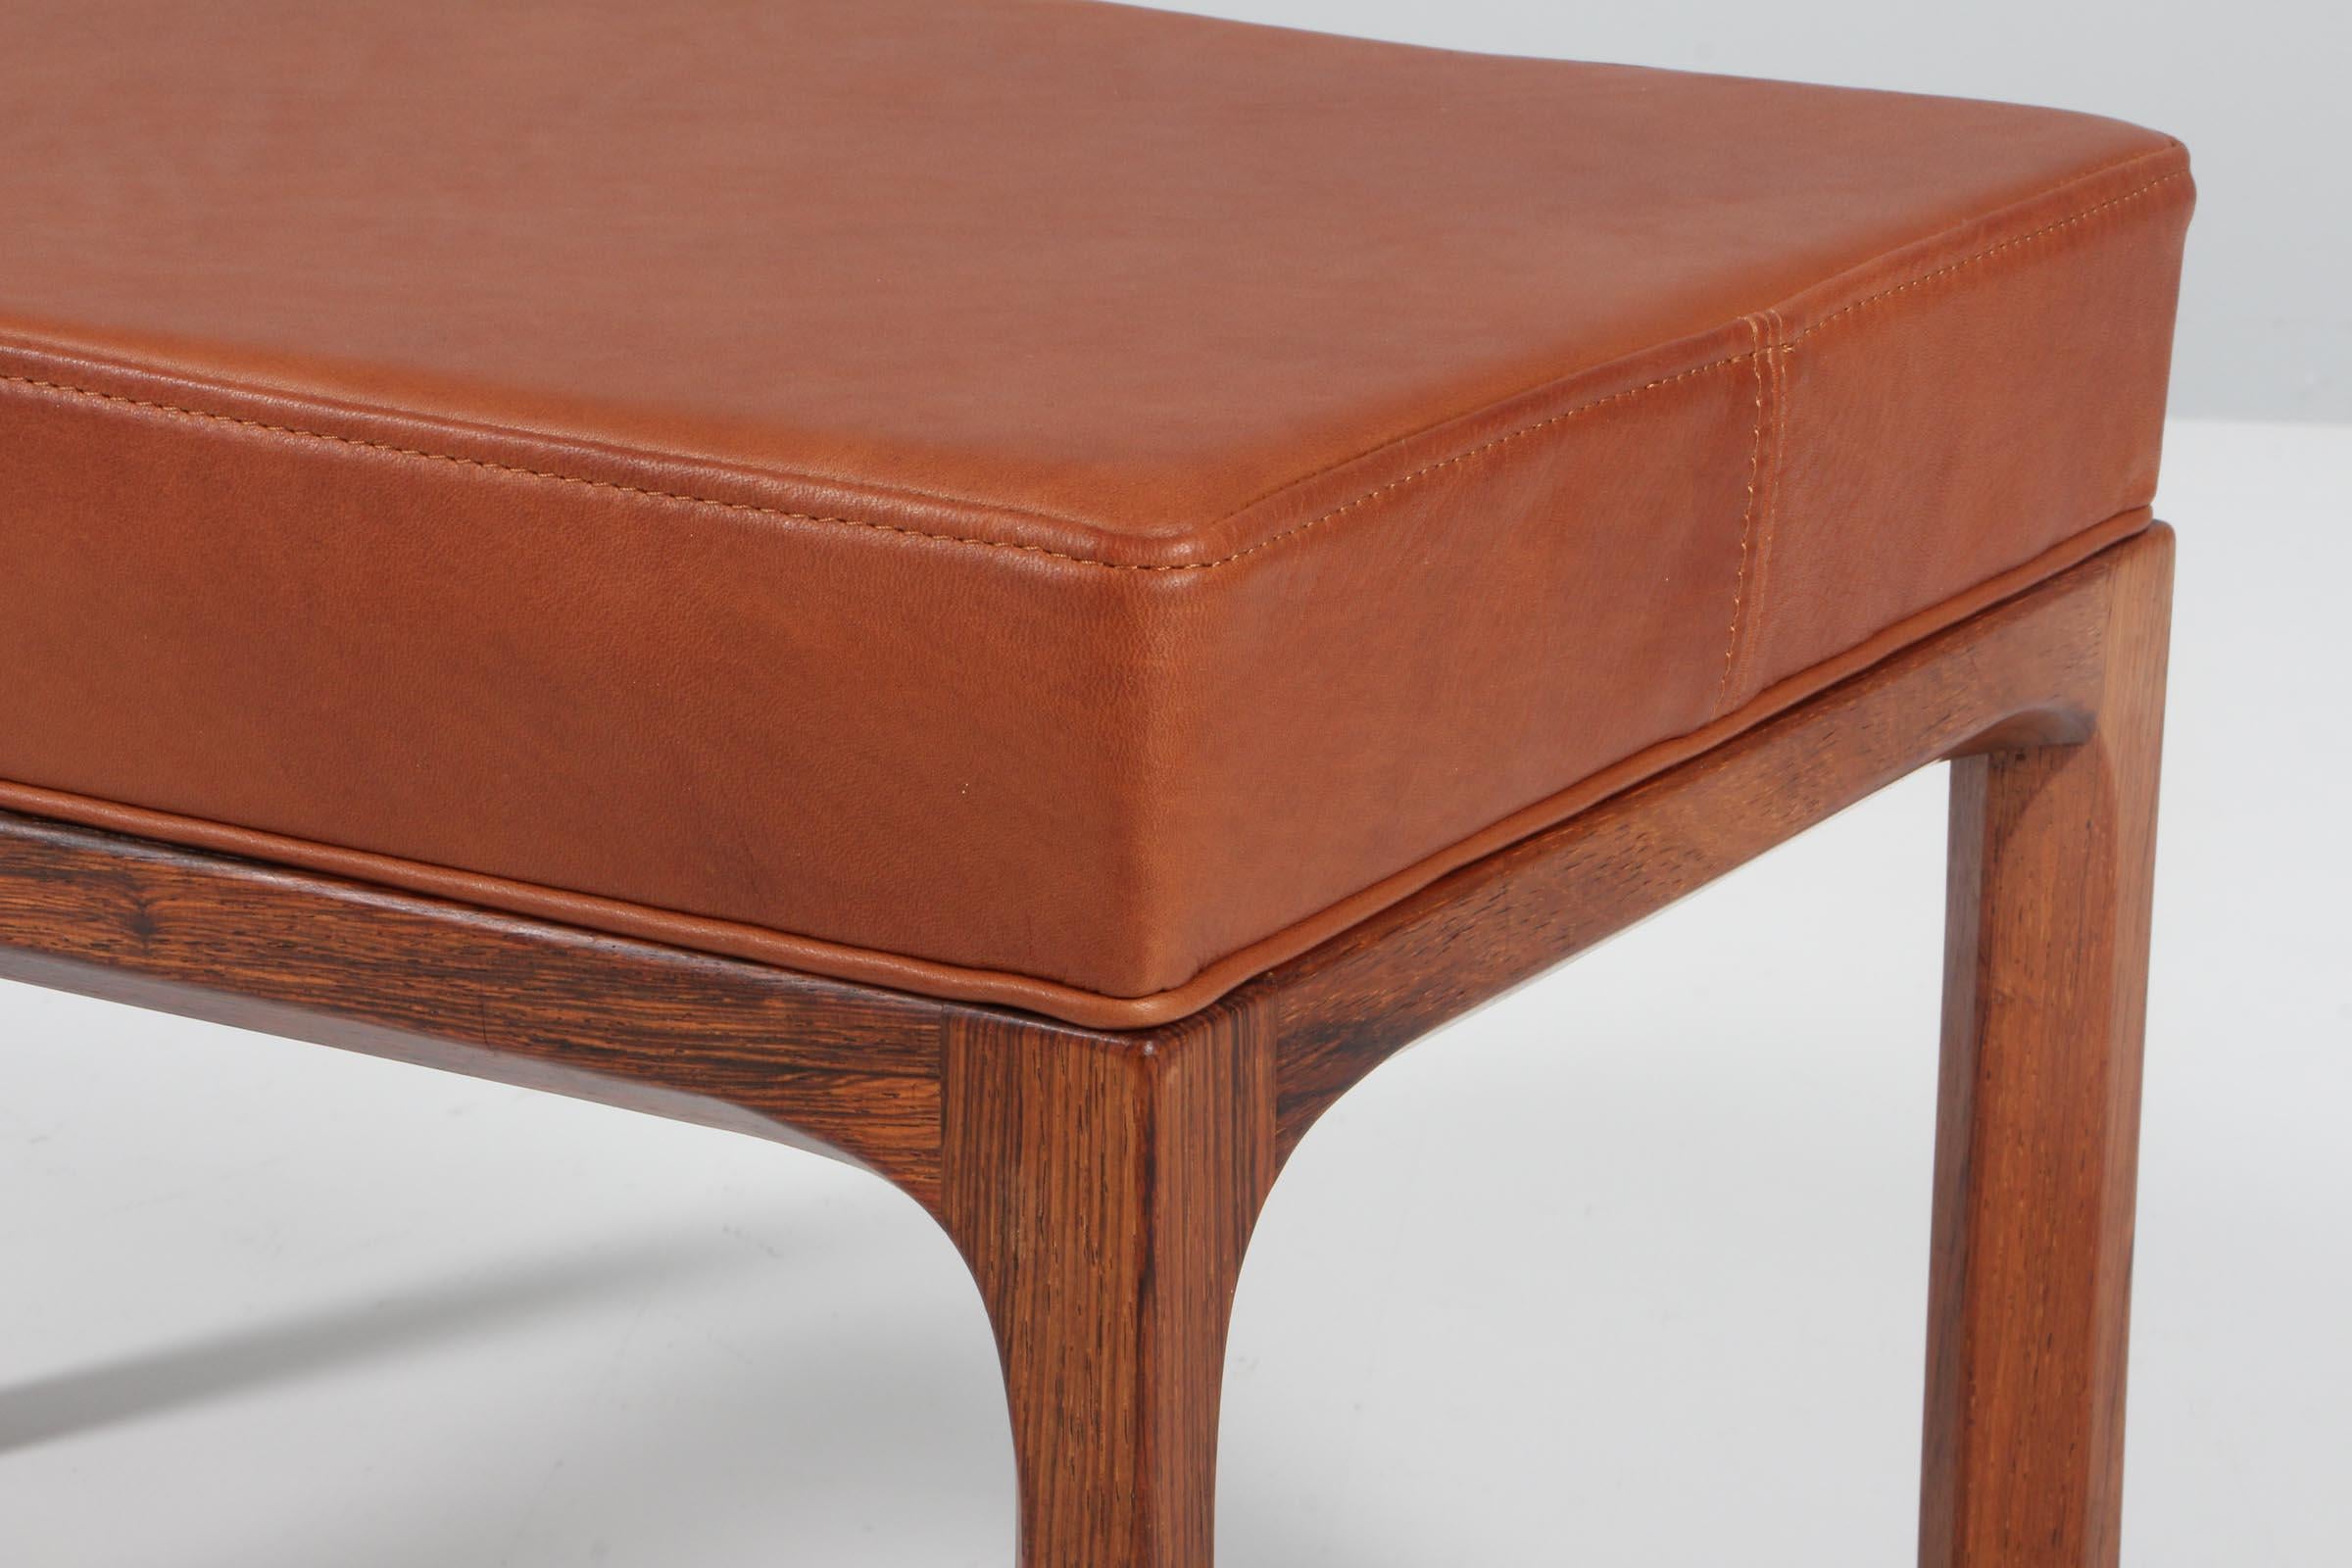 Scandinavian Modern Kai Kristiansen for Aksel Kjersgaard, stool with leather and rosewood For Sale